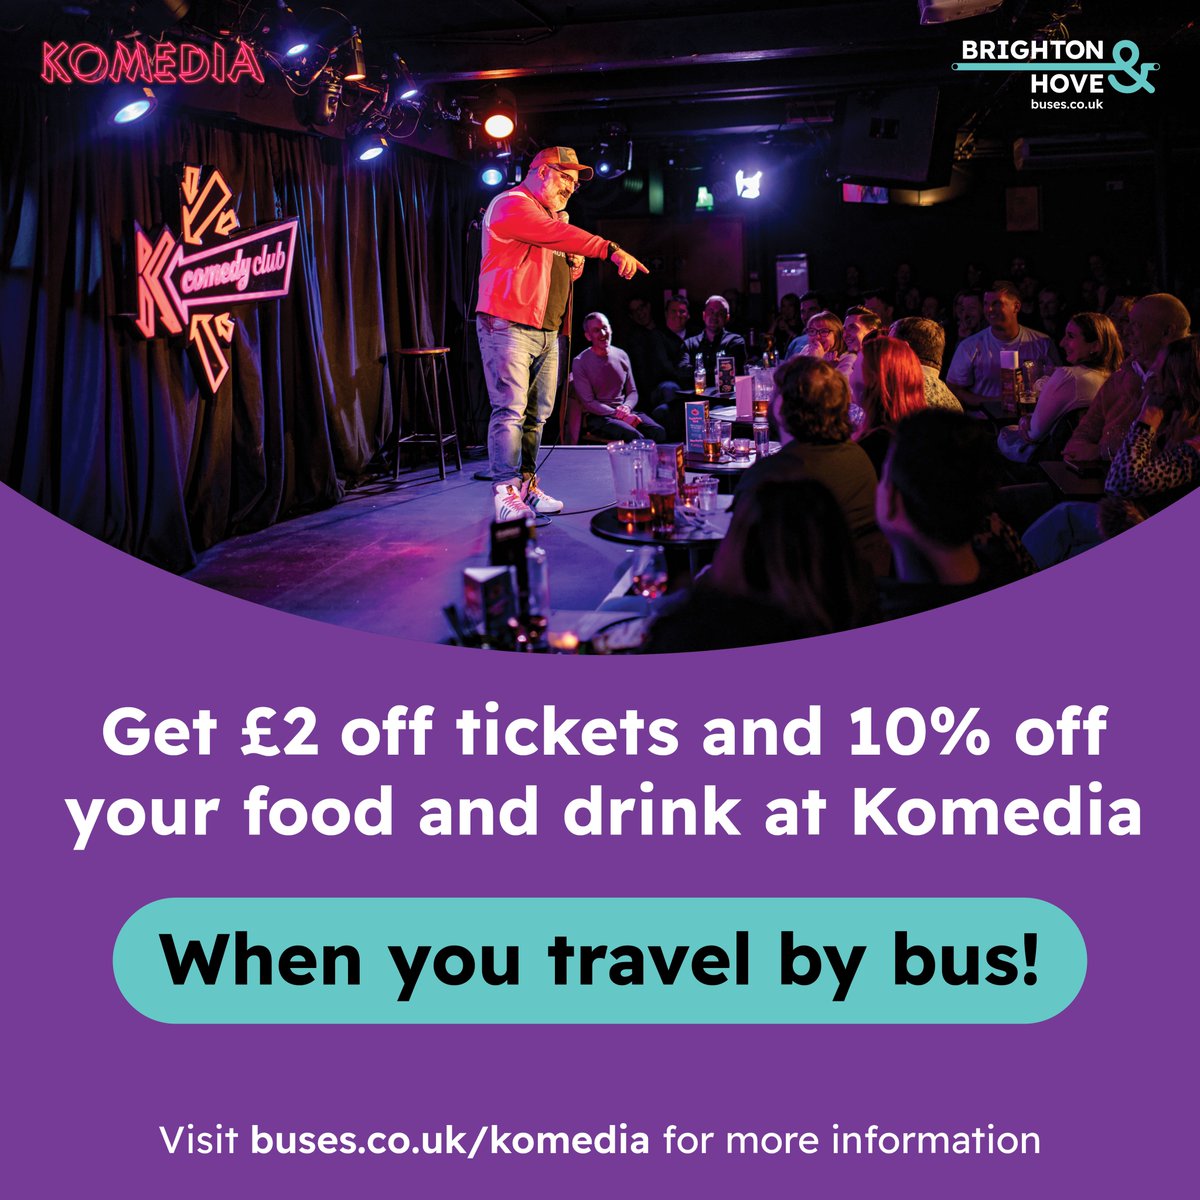 Discounts for bus passengers at Komedia! Get £2 off your tickets and 10% food and drink when you travel by bus... Find out more on our website: buses.co.uk/discounts-kome…